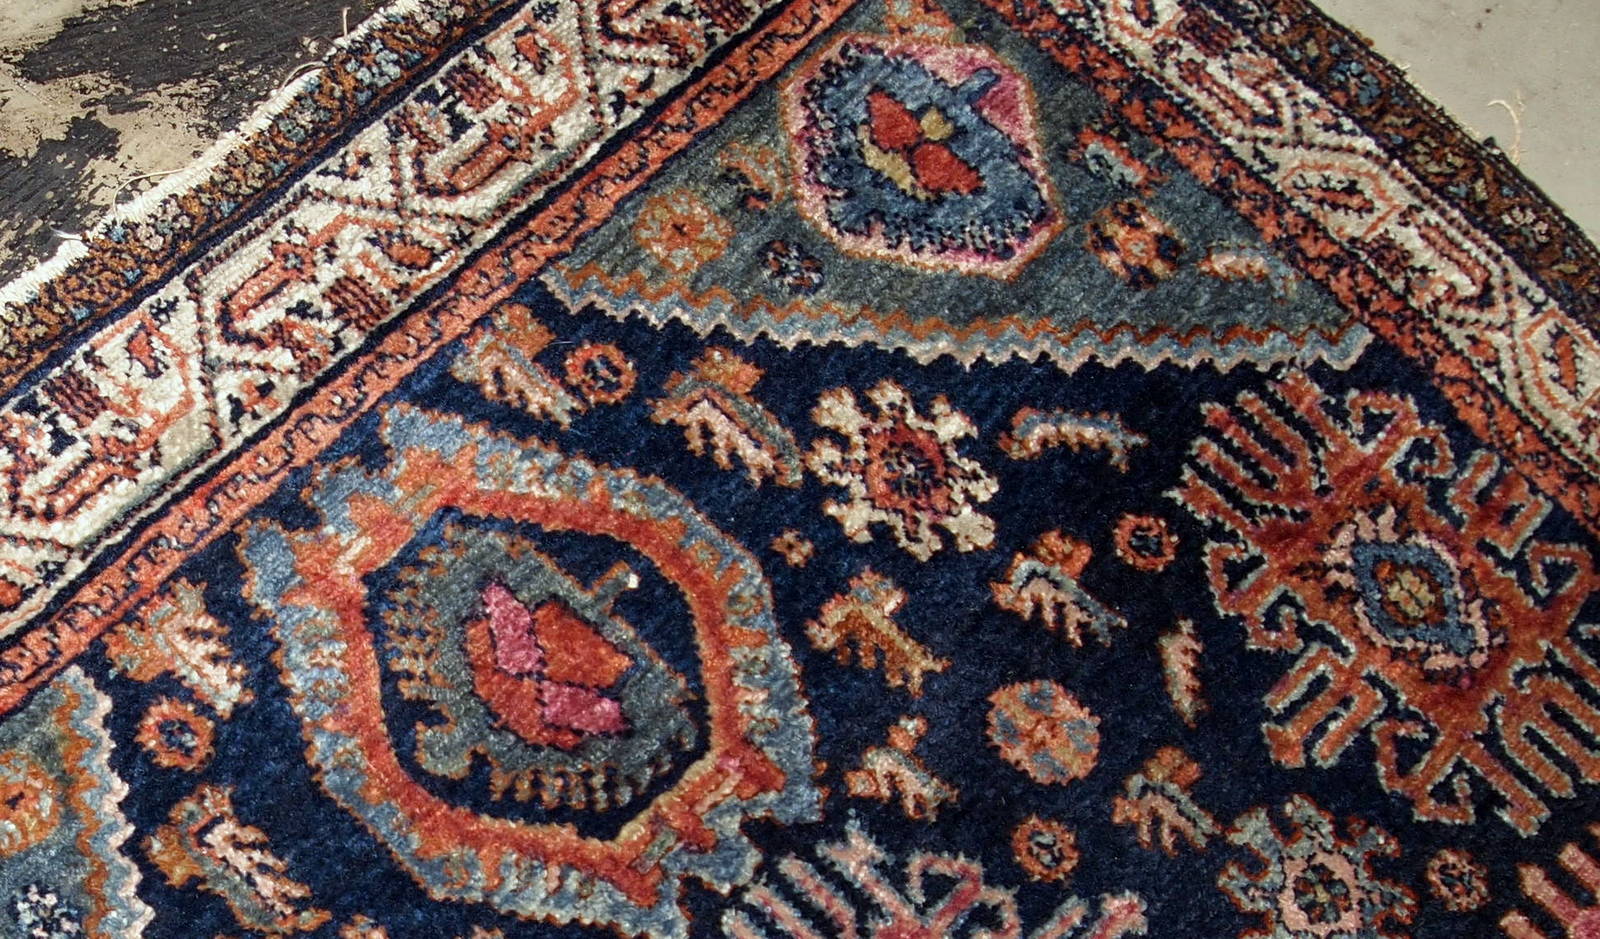 Handmade antique Malayer rug from the beginning of 20th century. The rug is in original good condition, has all-over design on navy blue background.